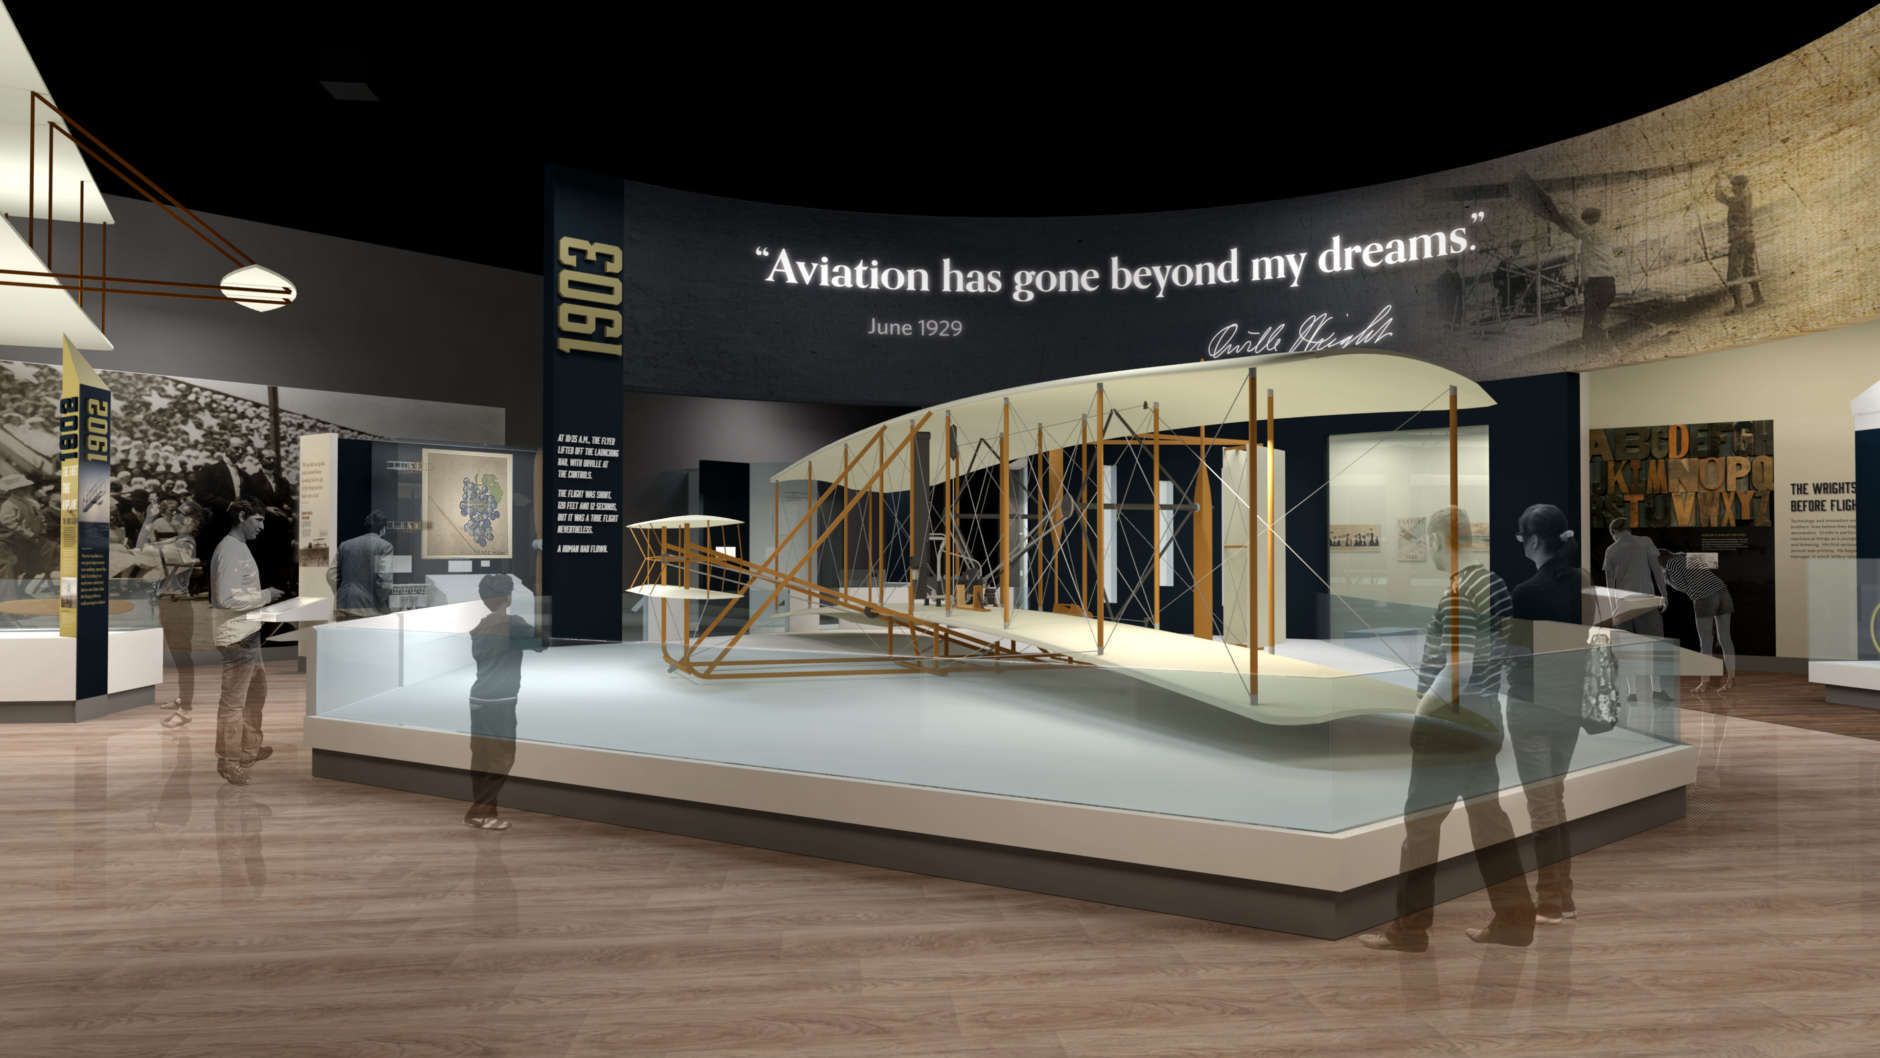 "The Wright Brothers" exhibit. (Copyright: Smithsonian Institution)